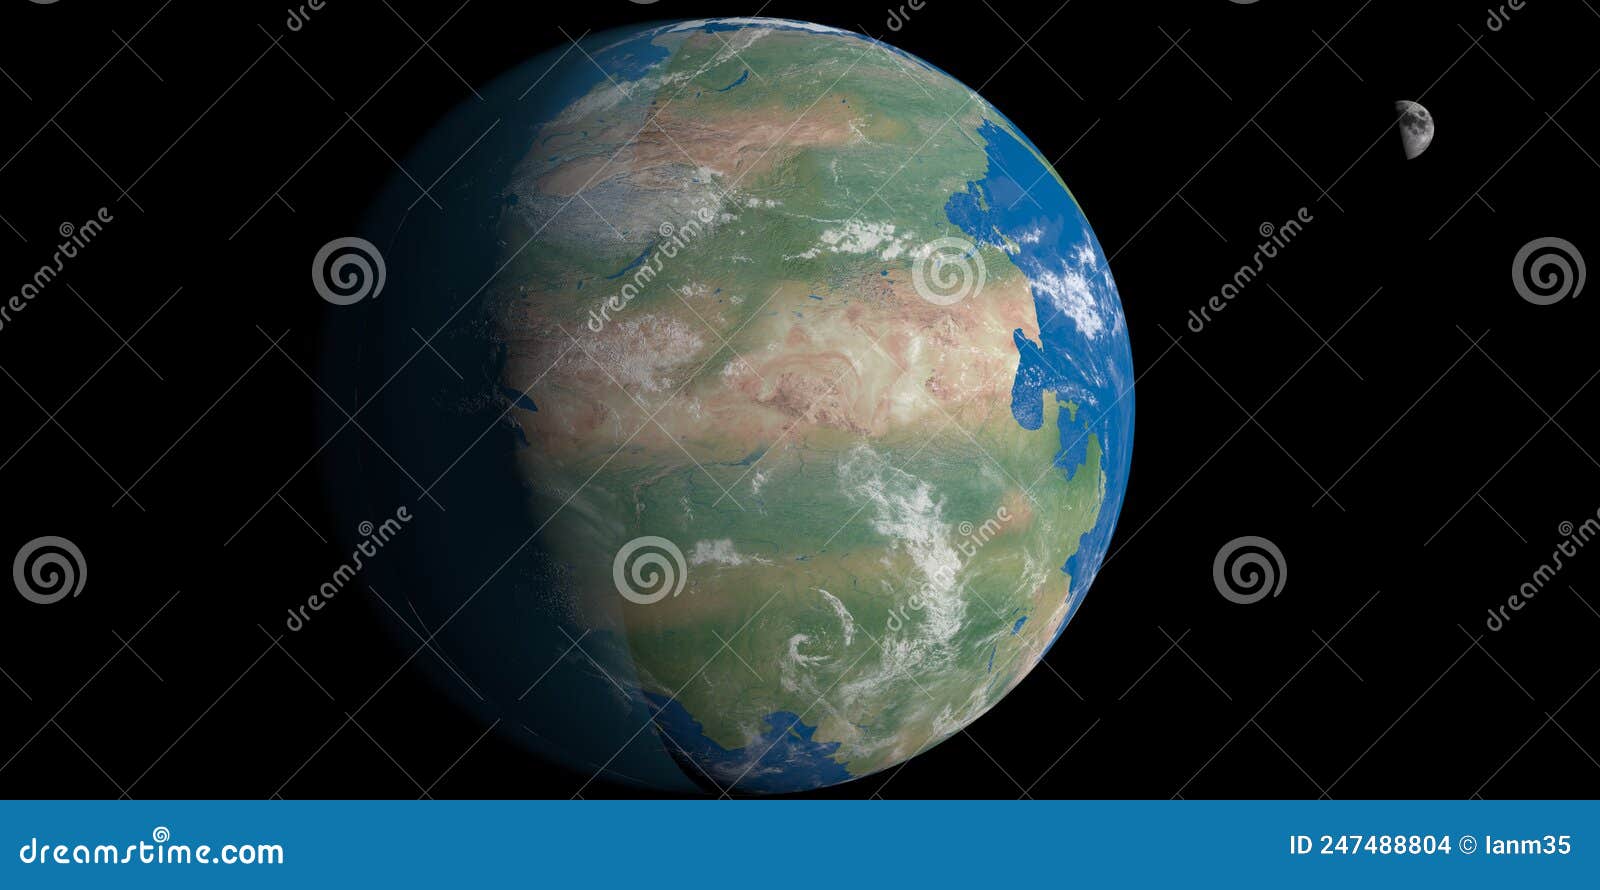 earth planet with ancient supercontinent pangea or pangaea